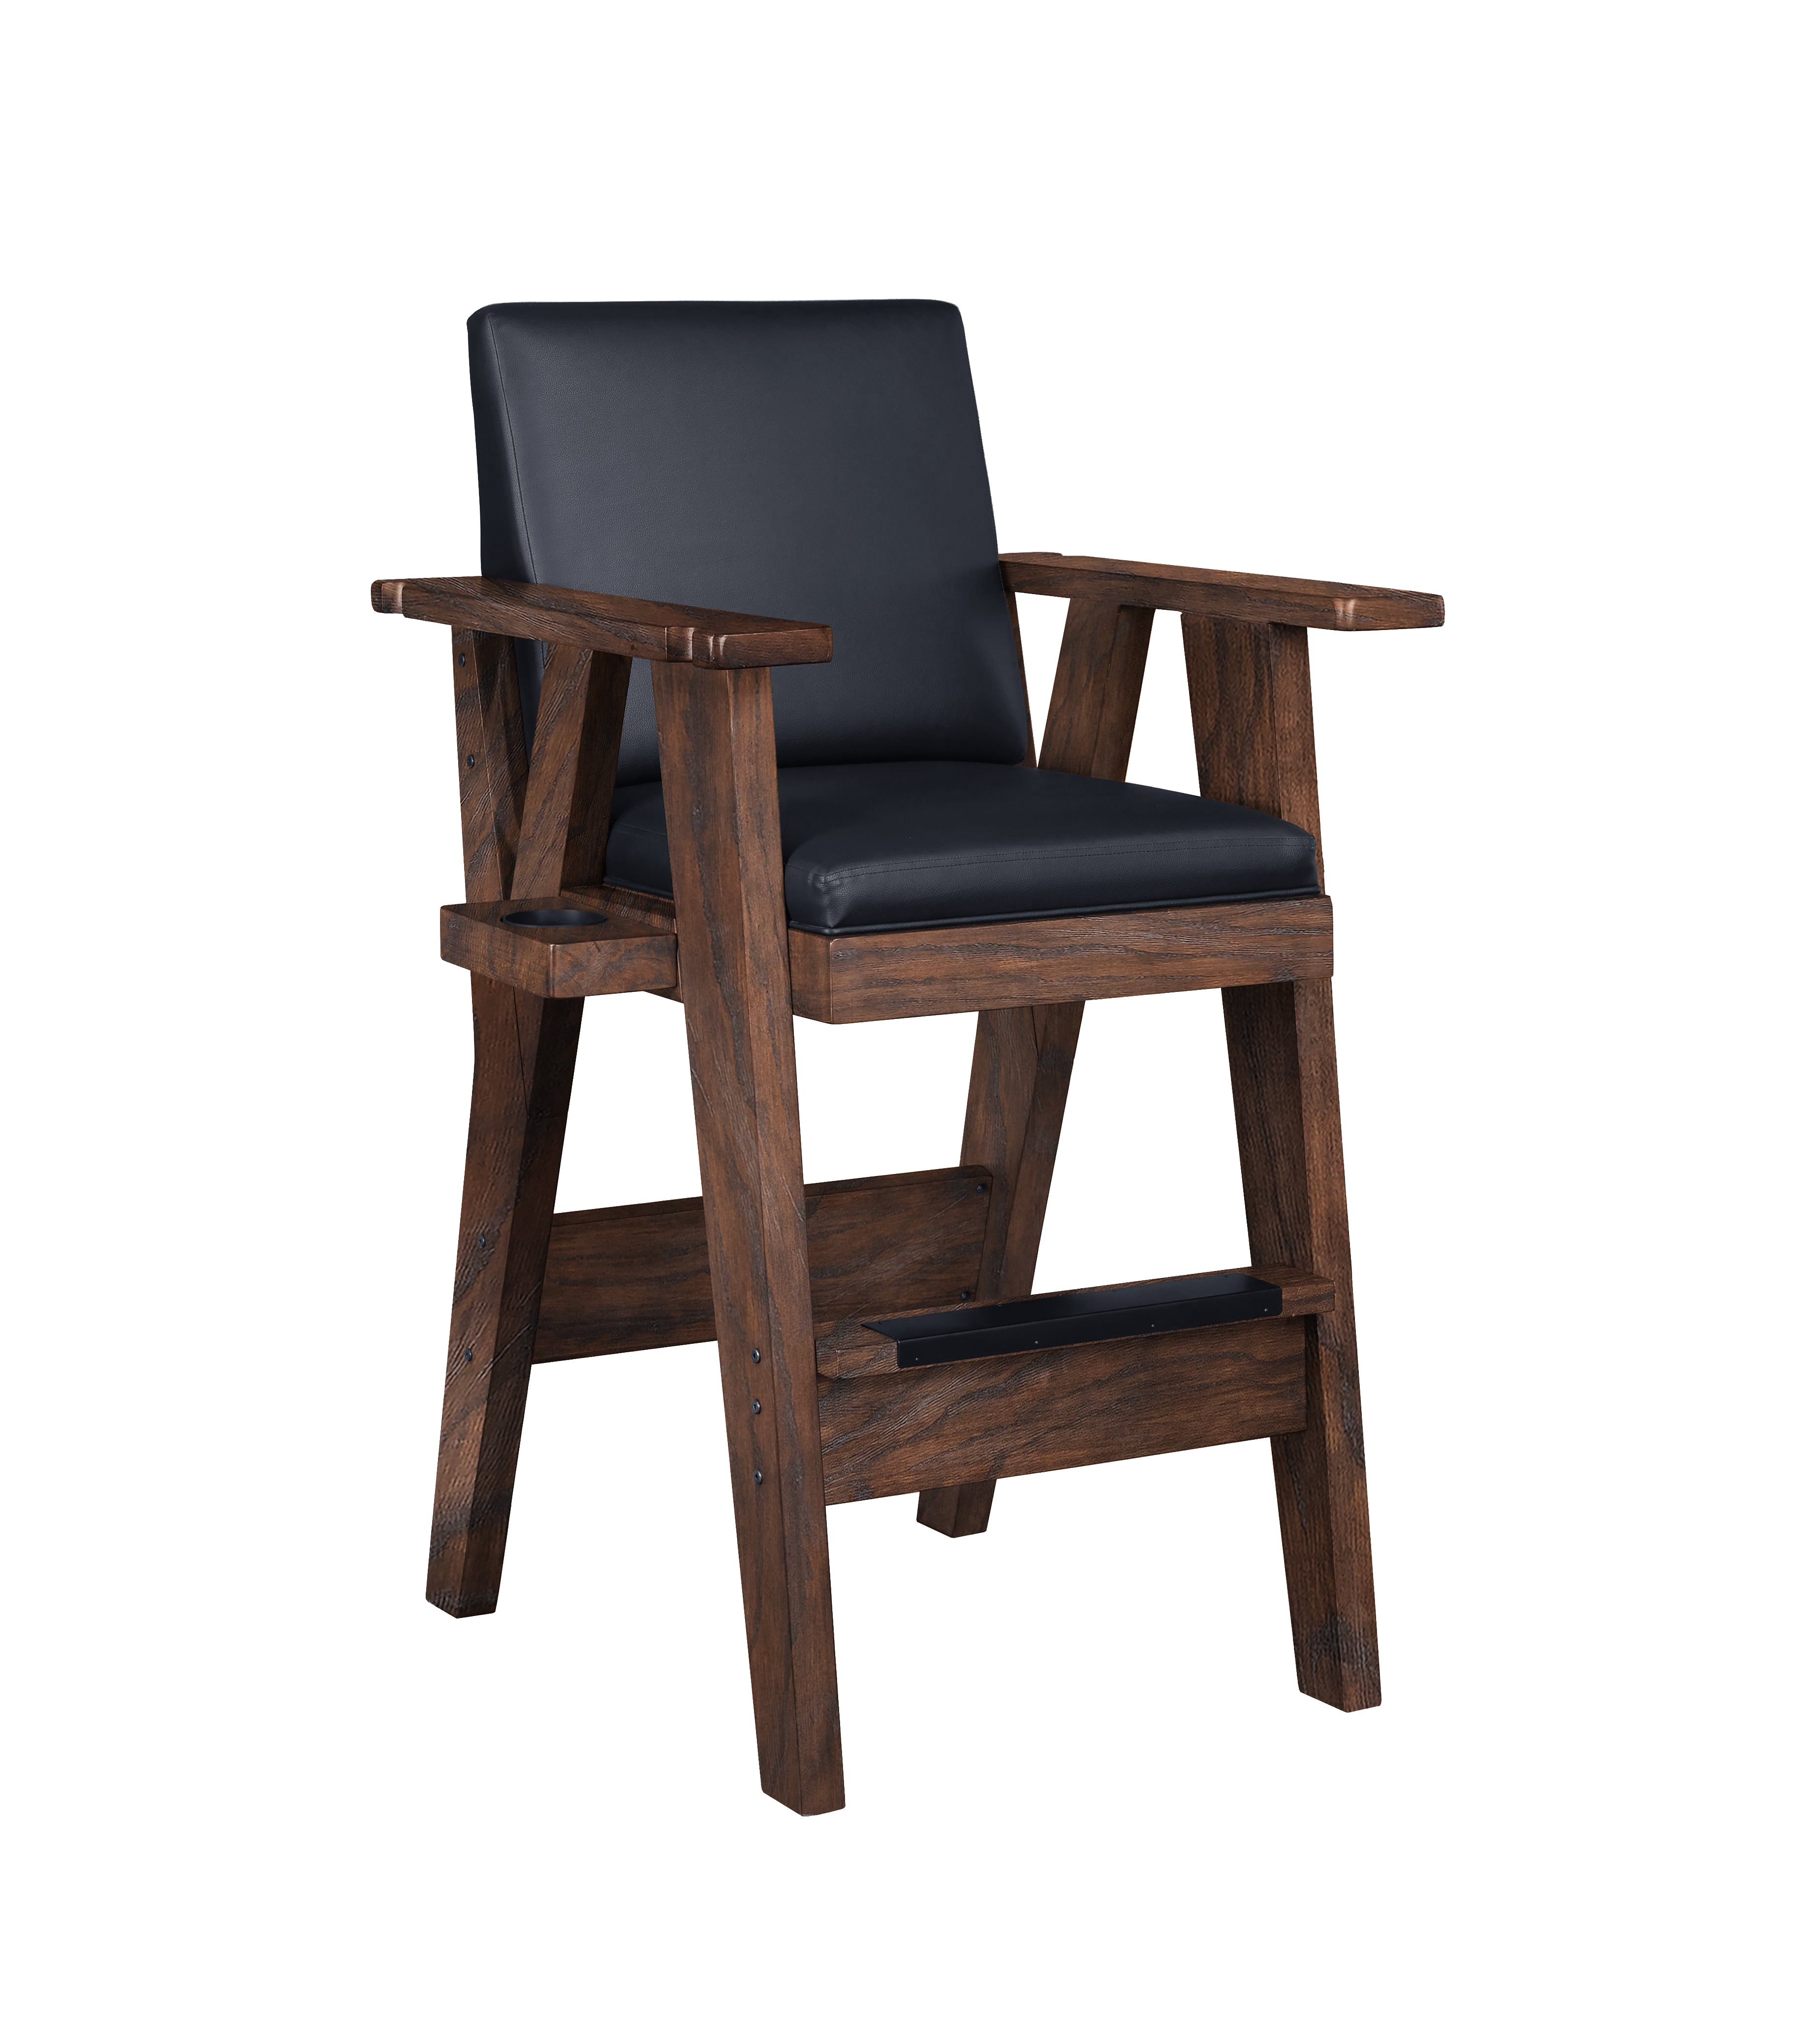 Legacy Billiards Sterling Spectator Chair in Whiskey Barrel Finish